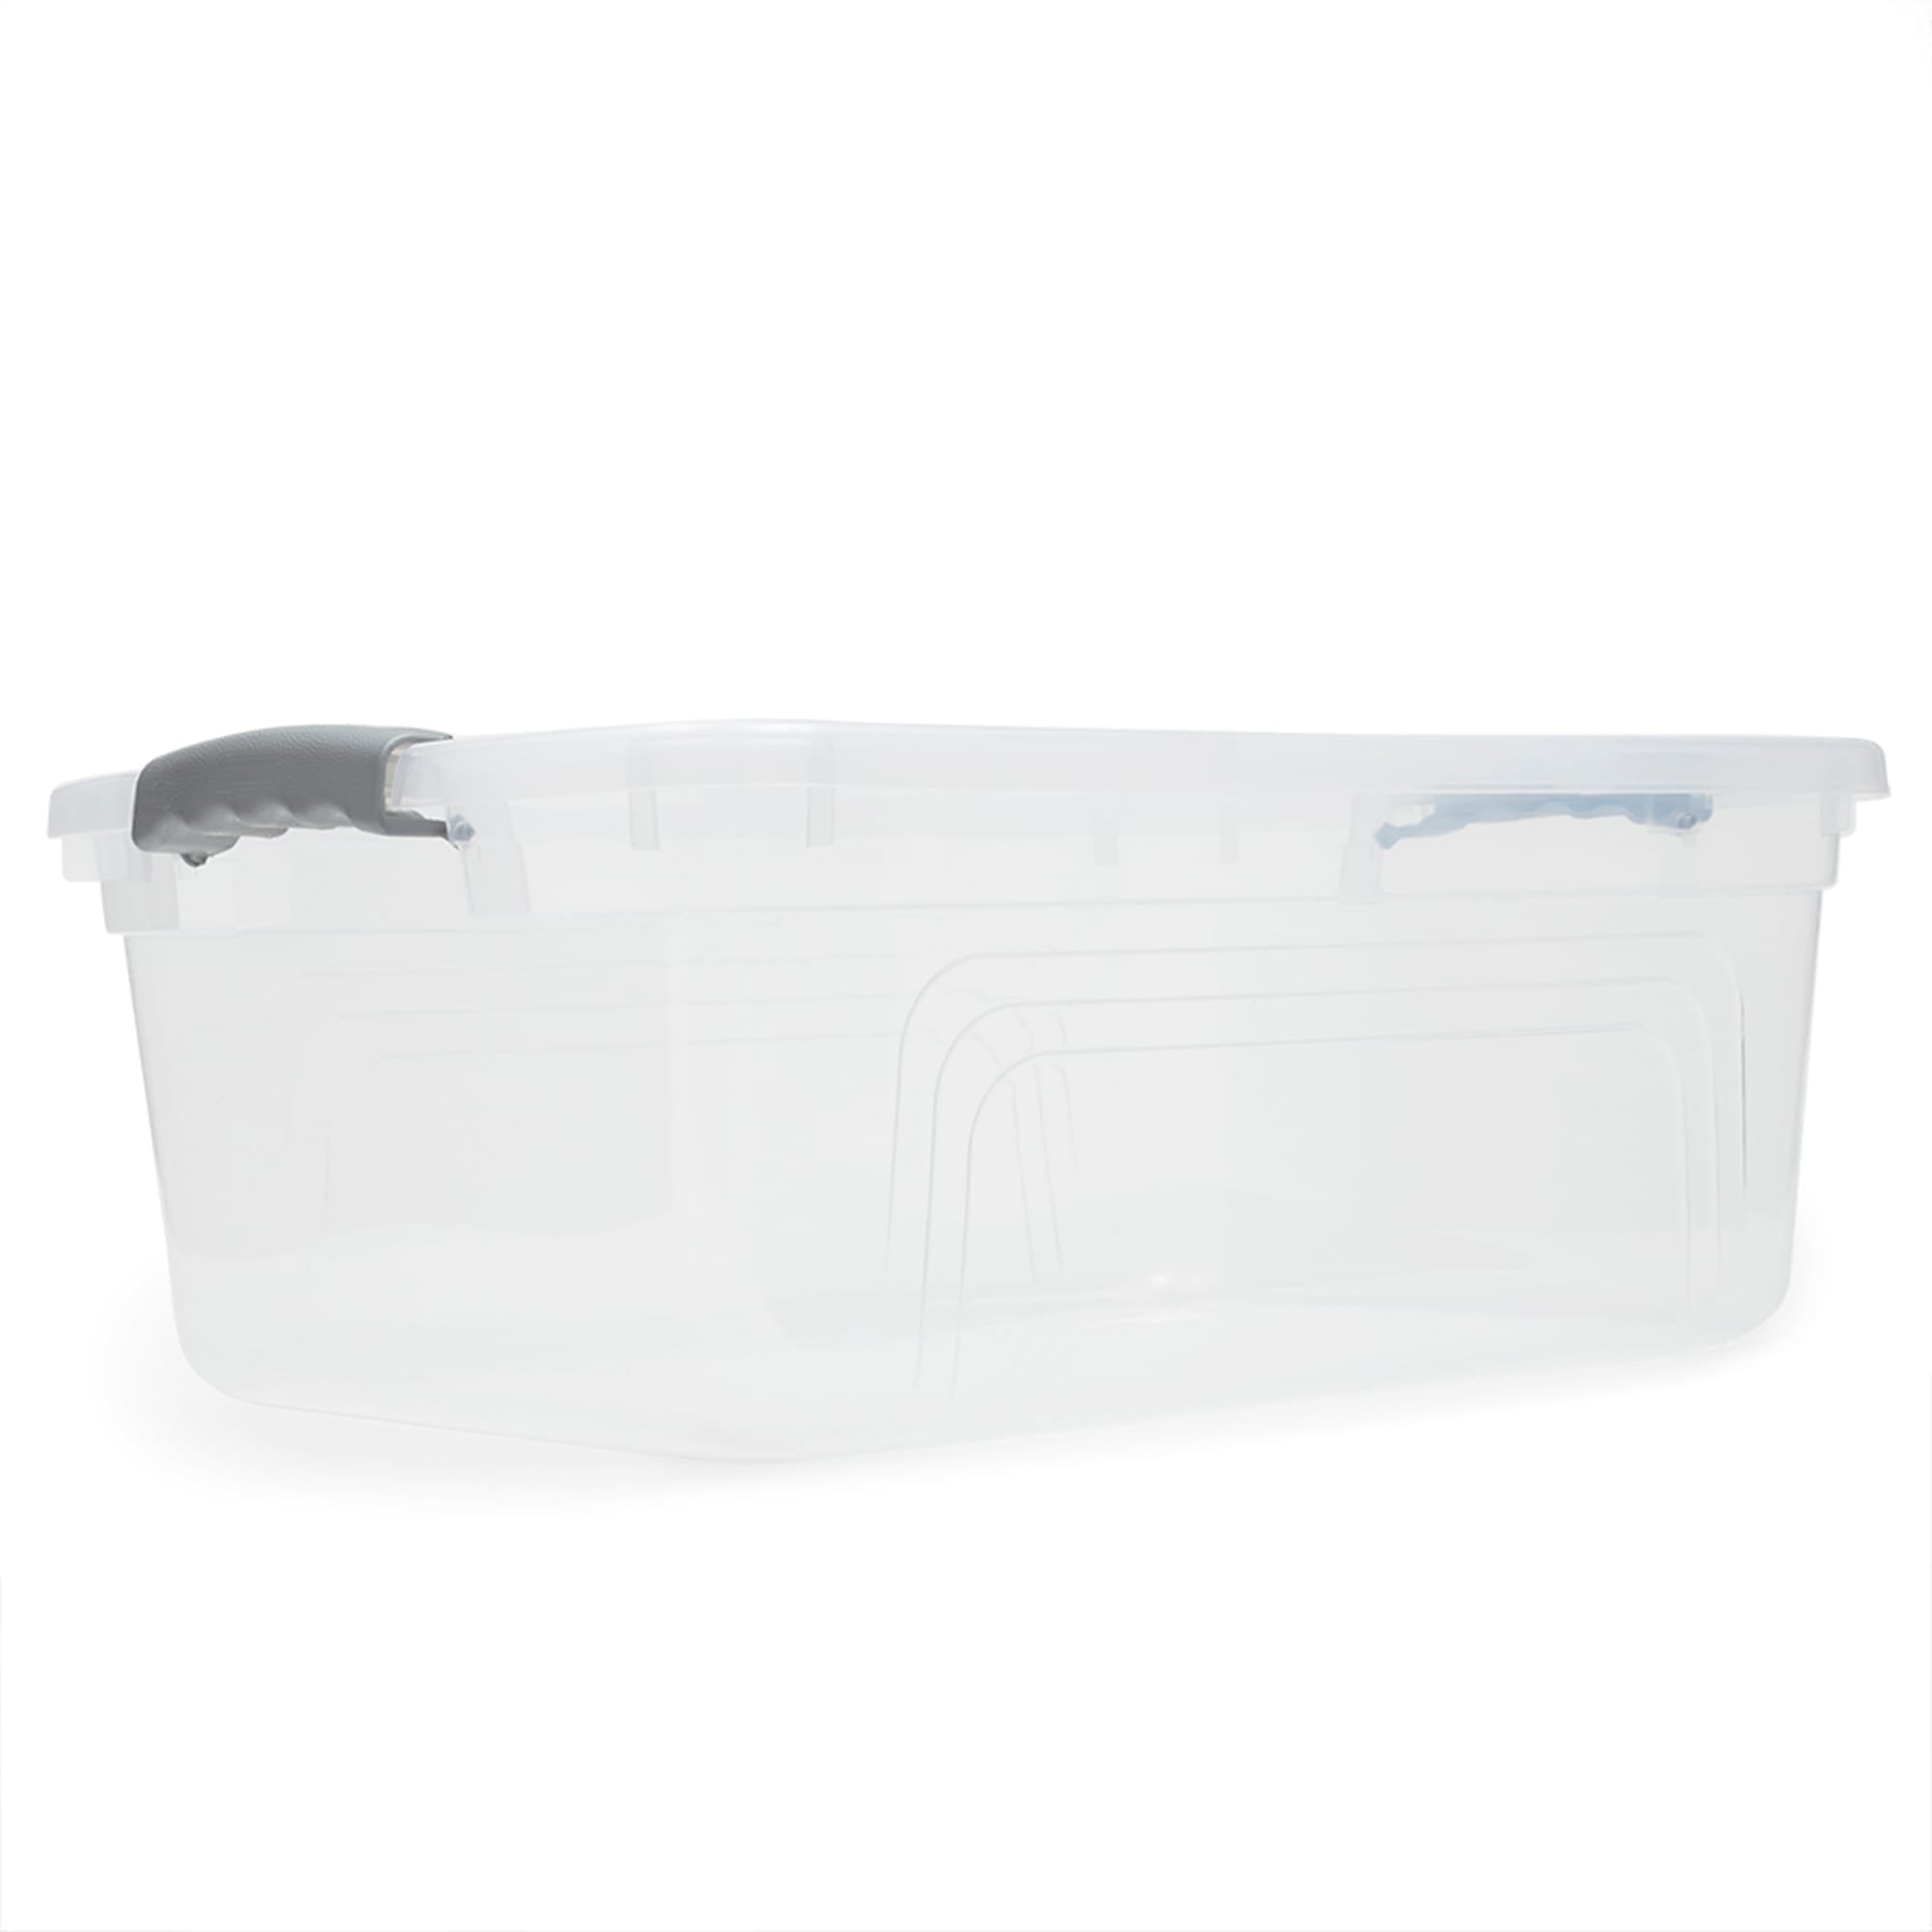 Home Basics 20 Liter Rectangular Plastic Storage Container with lid, Clear $10 EACH, CASE PACK OF 9